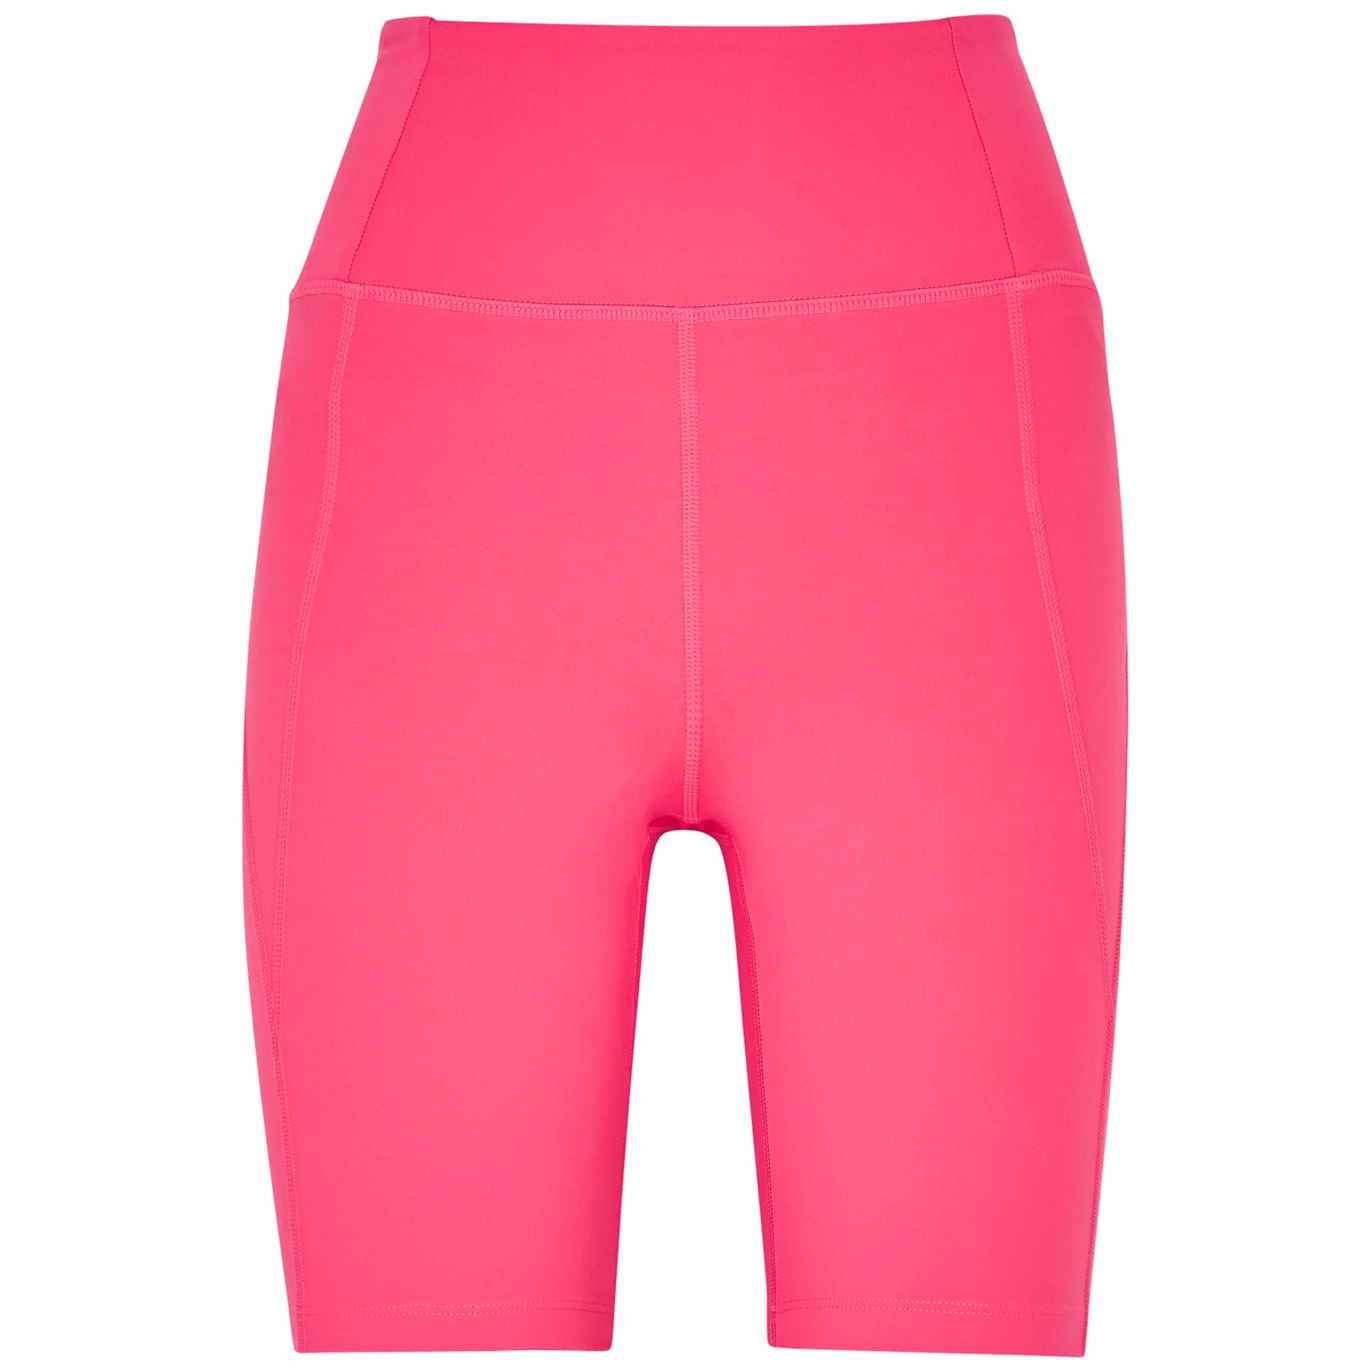 Girlfriend Collective High-Rise Bike Bright Pink Shorts - S